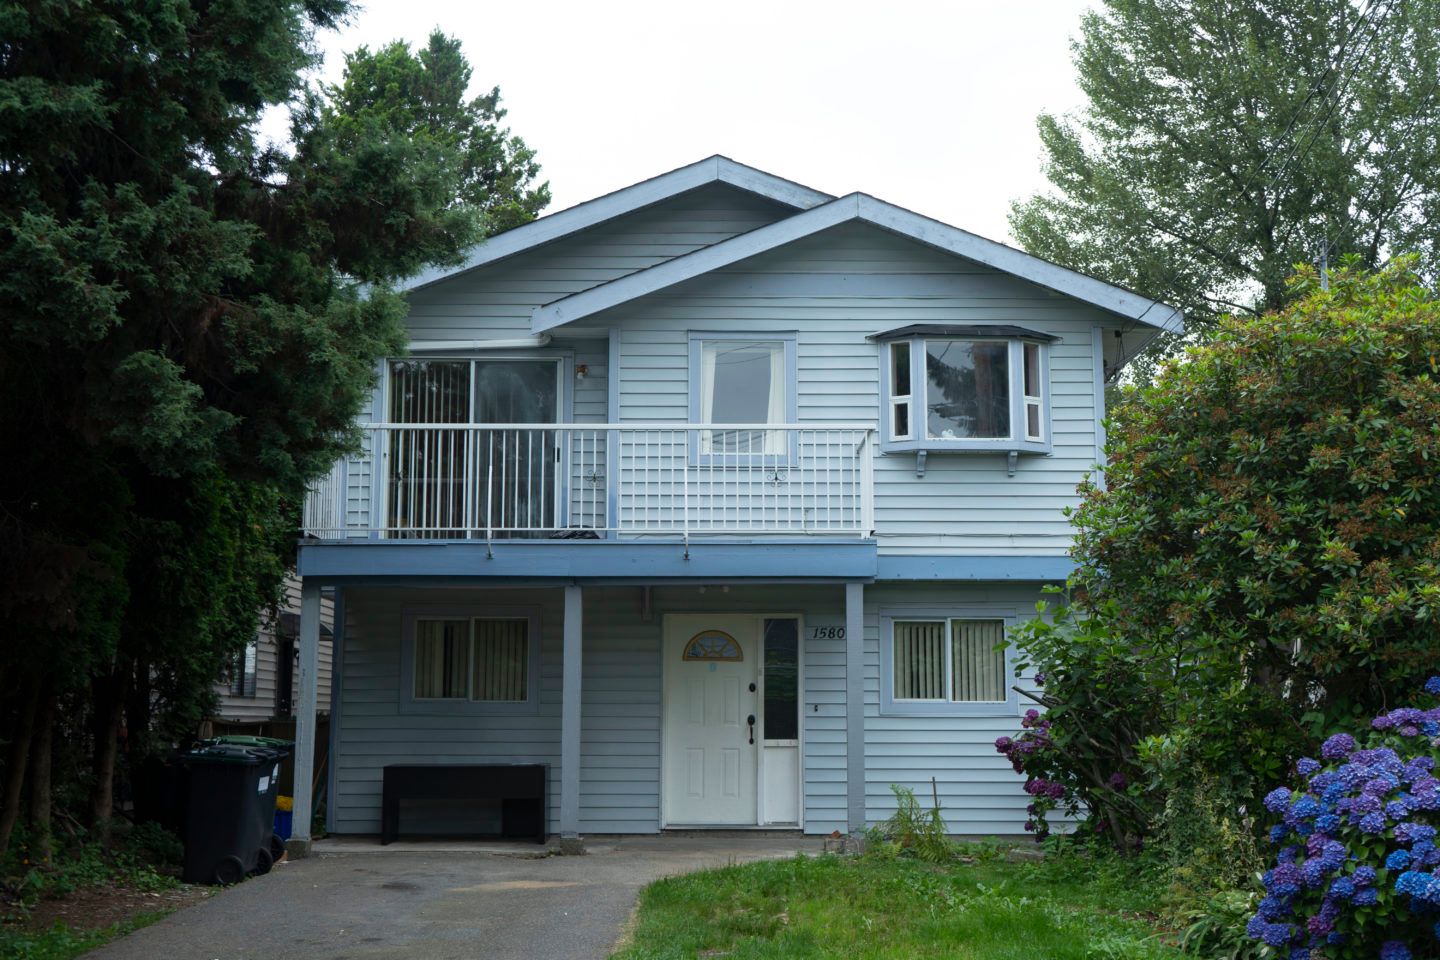 Main Photo: 1580 BOND STREET in : Lynnmour House for sale (North Vancouver)  : MLS®# R2226729